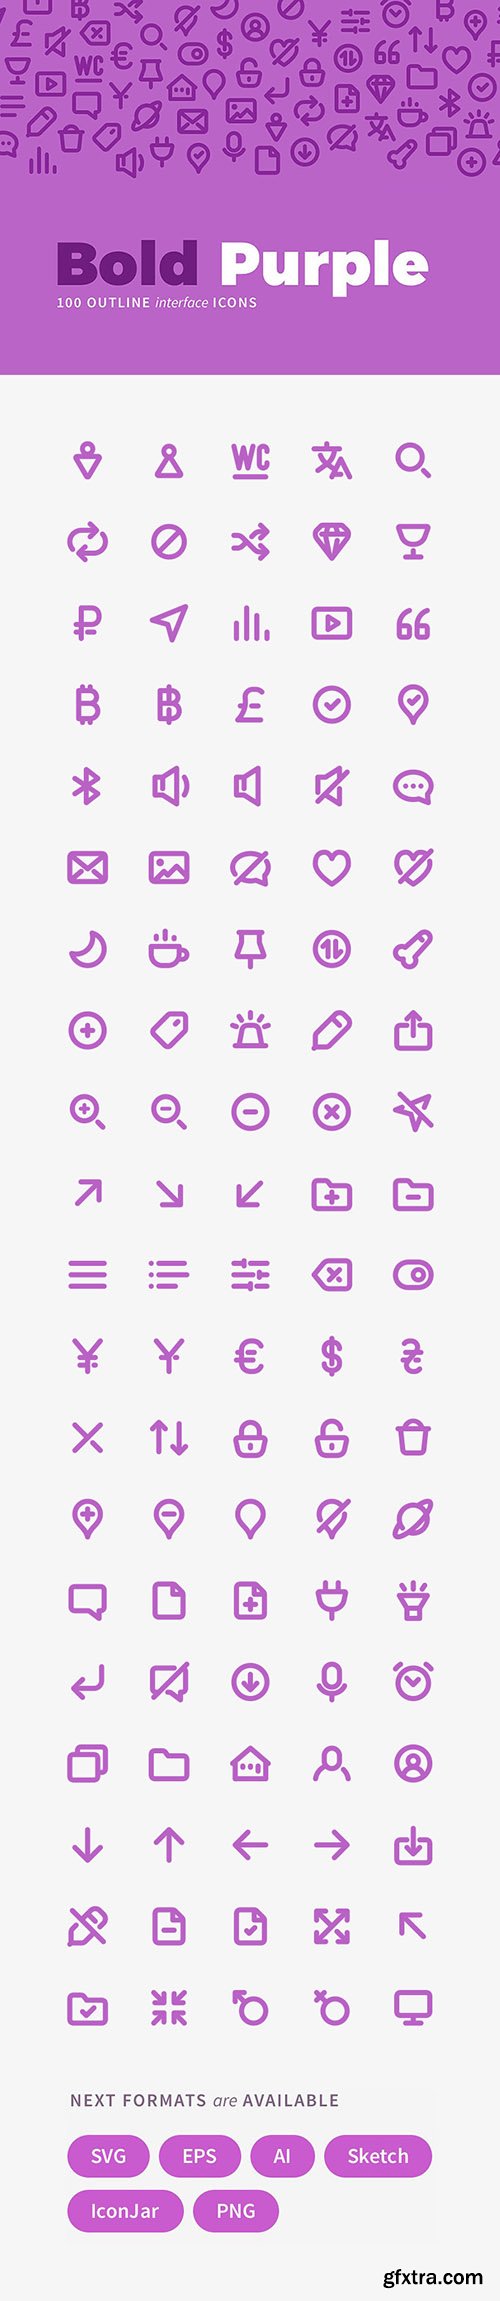 AI, EPS, PNG, SVG Vector Web Icons - Bold Purple